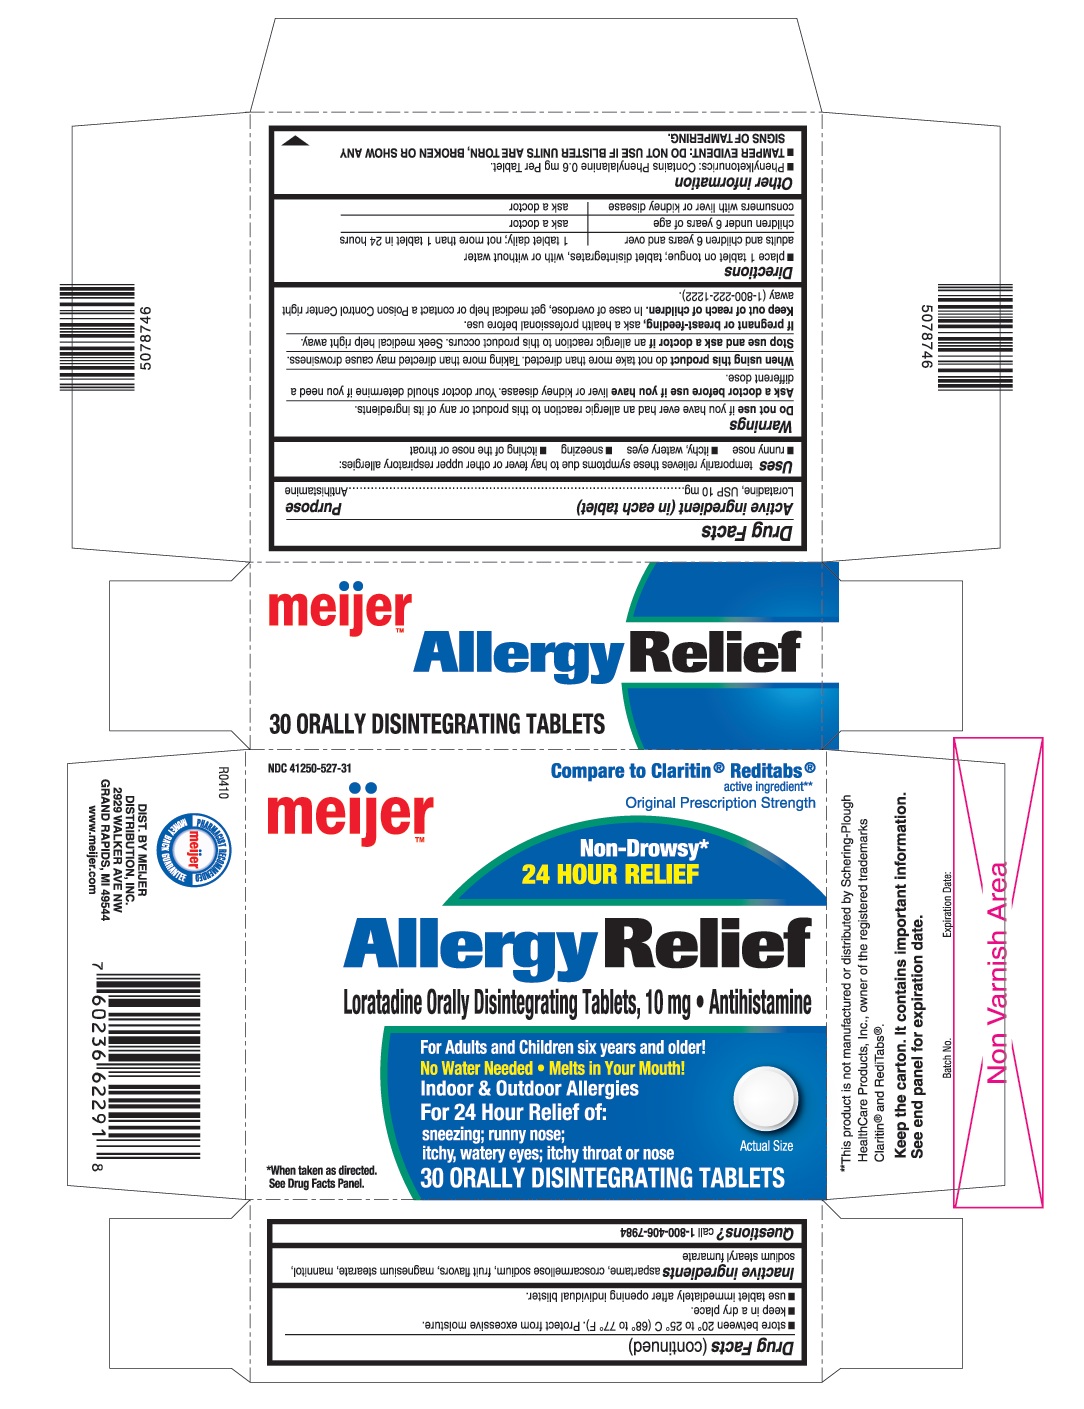 This is the 30 count blister carton label for Meijer Loratadine ODT, Claritin like.